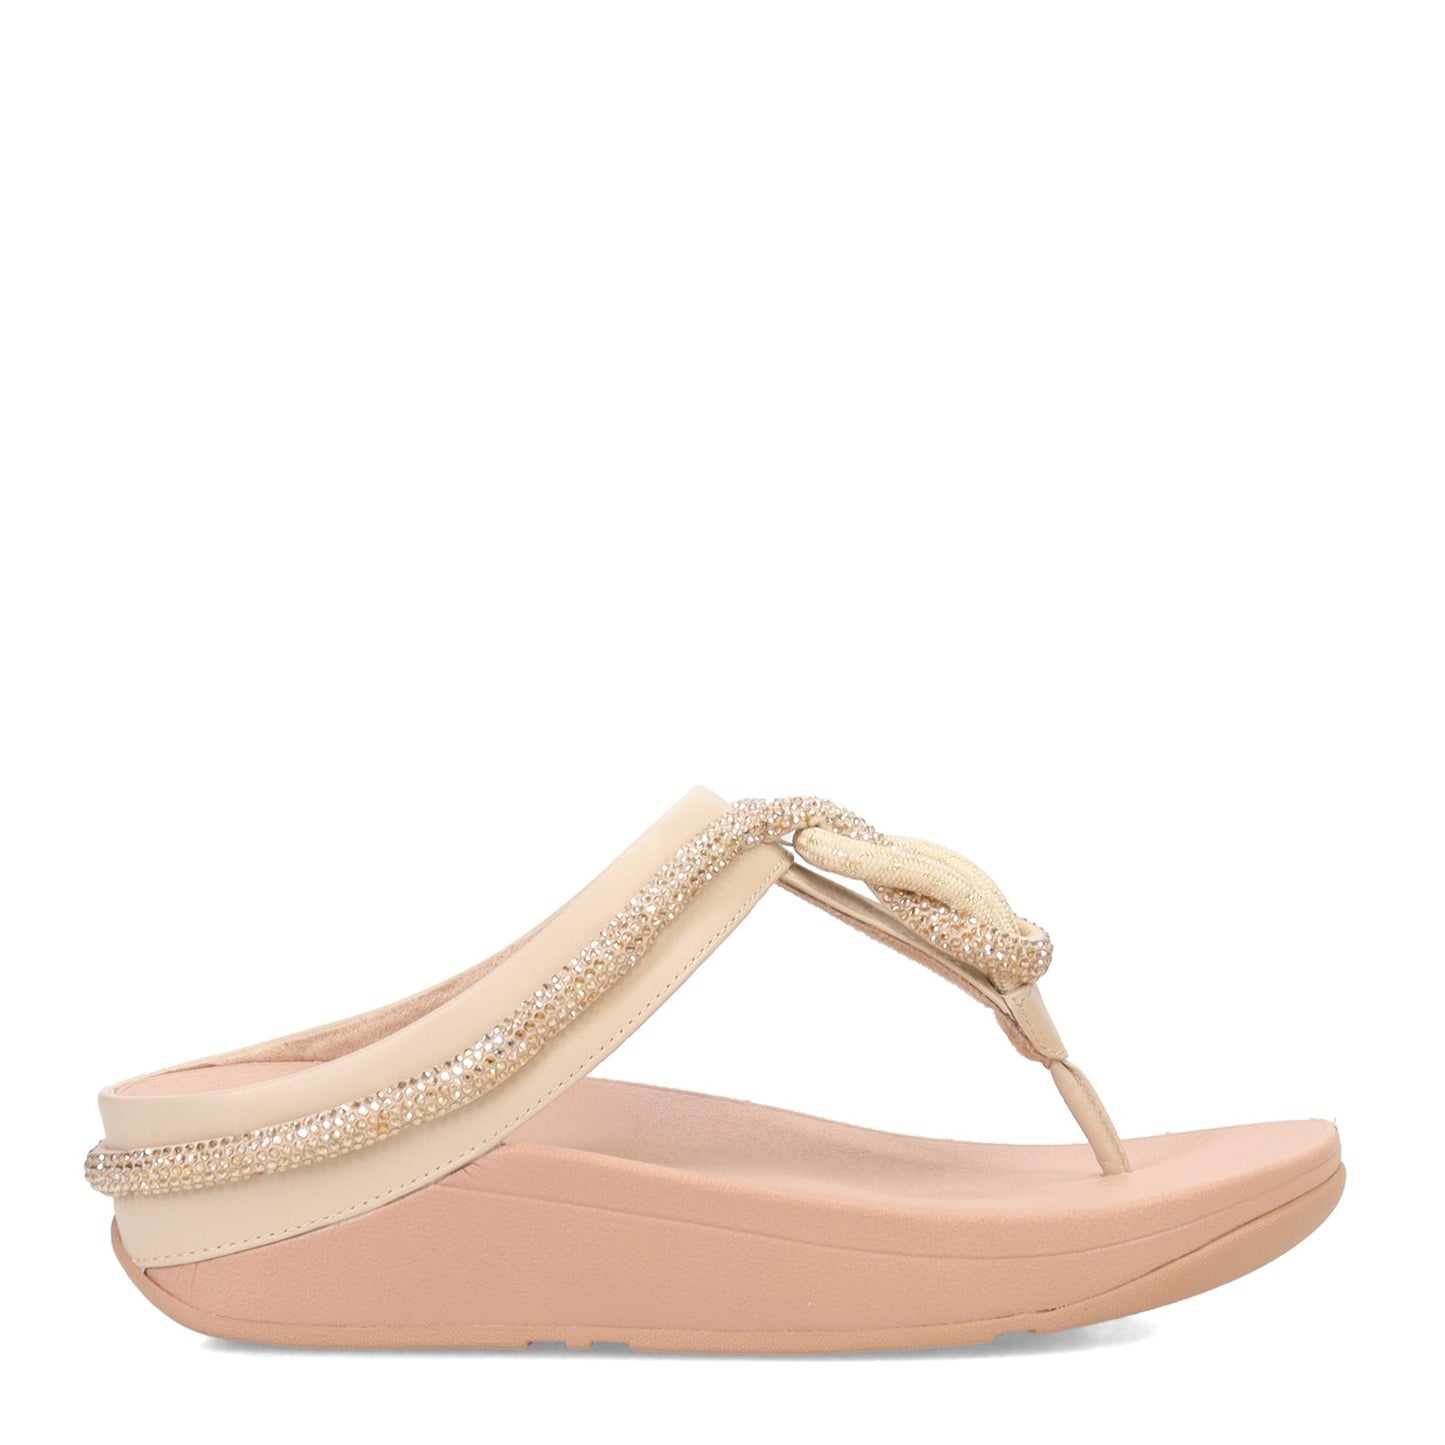 FITFLOP FINO SANDAL GOLD WITH GEMS